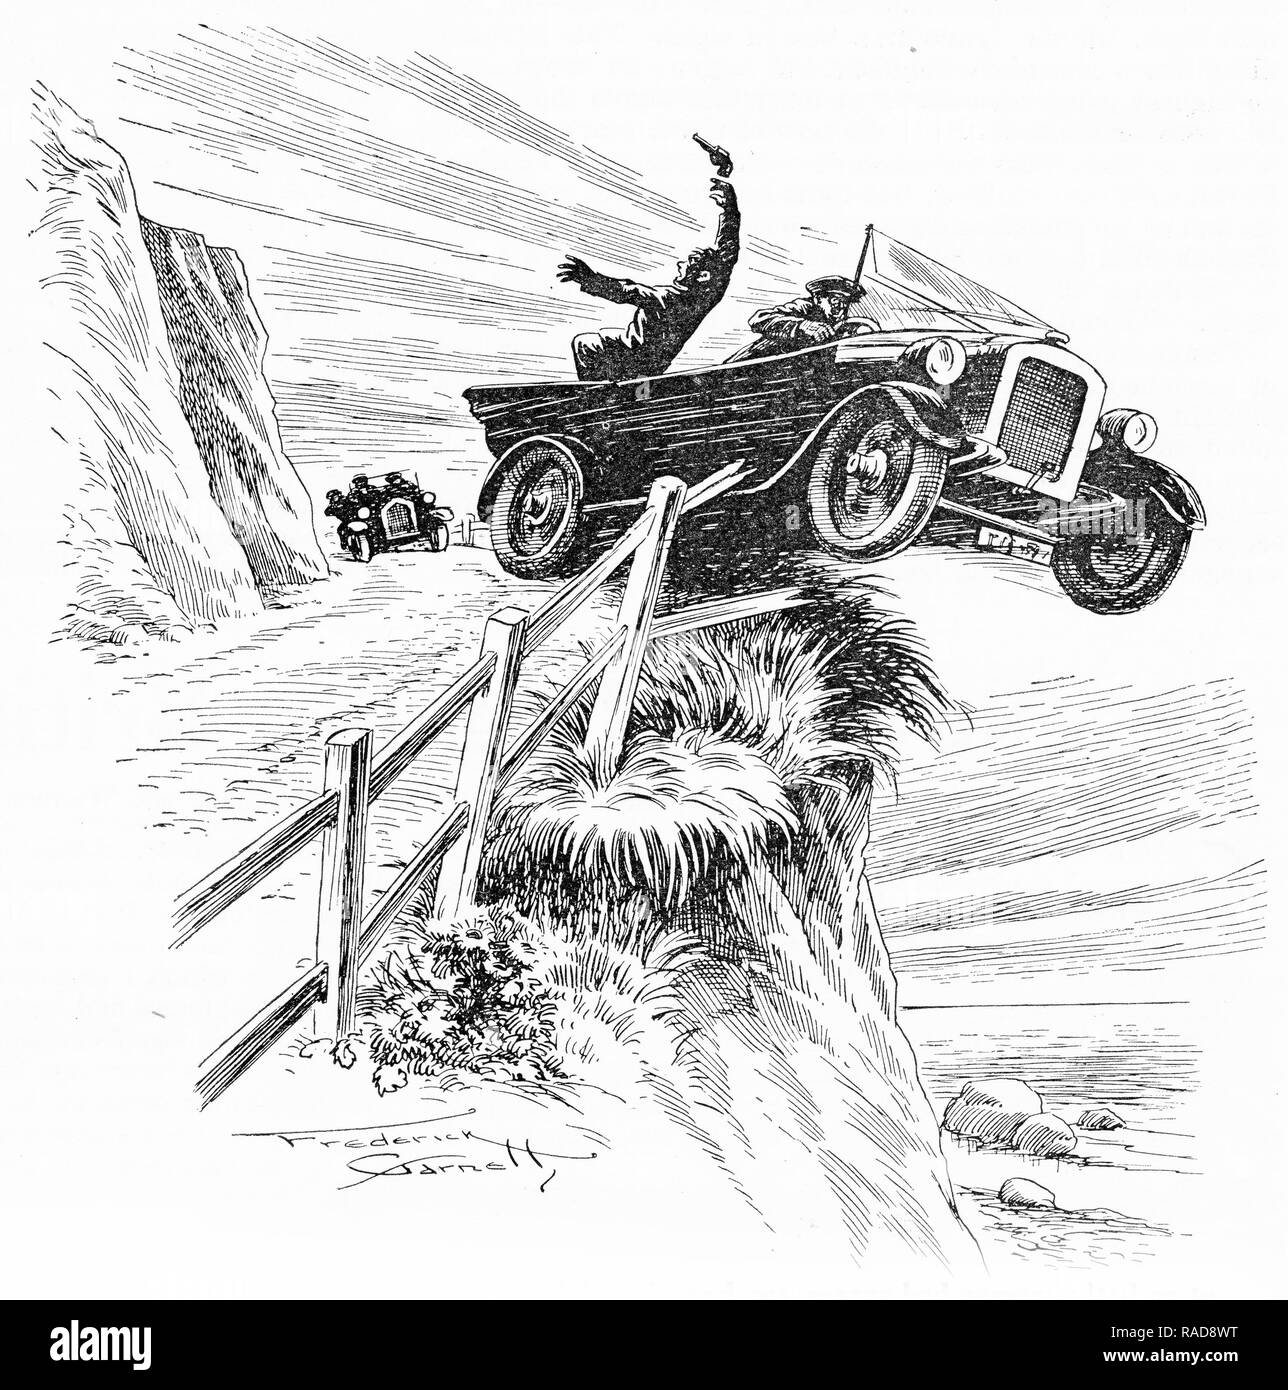 Engraving of a car chase, with one vehicle driving off a cliff. From an original engraving in the Boys Own Annual 1925. Stock Photo